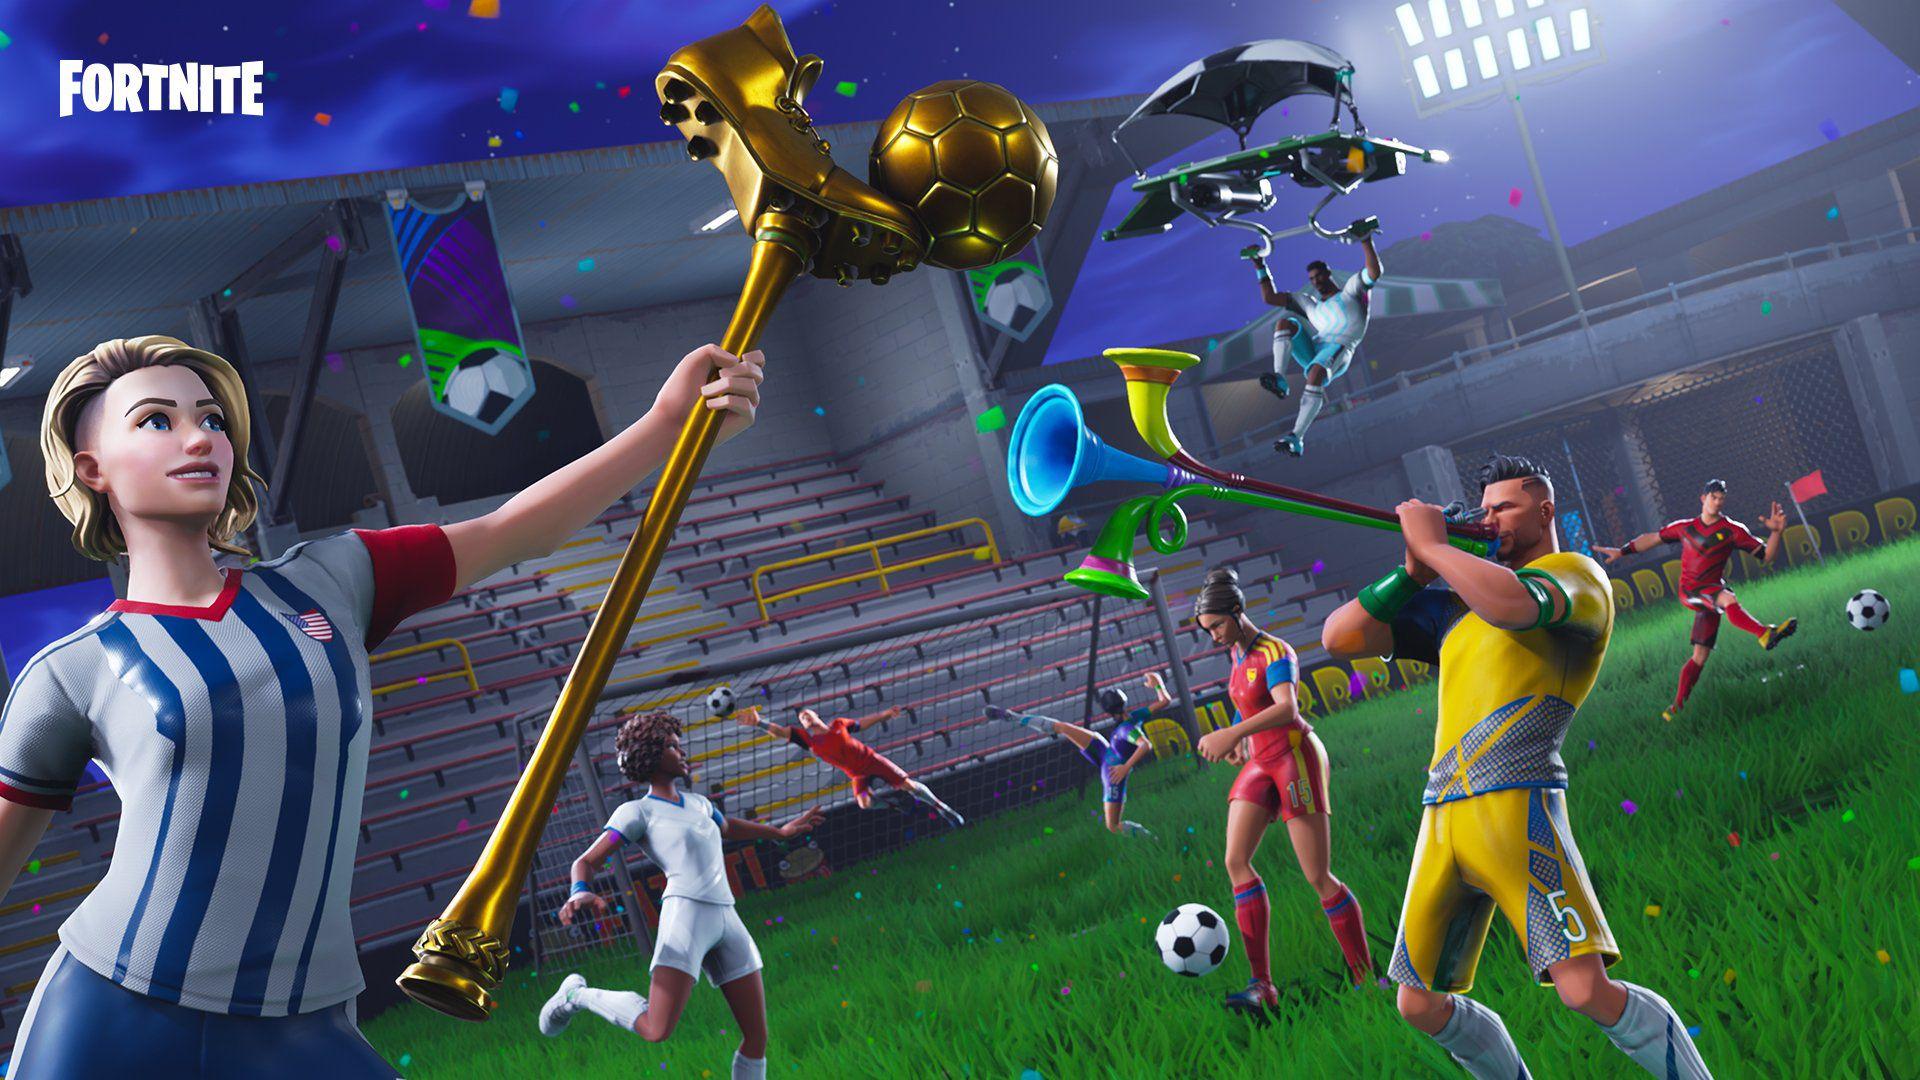 Fortnite Background Worldcup Wallpaper and Free